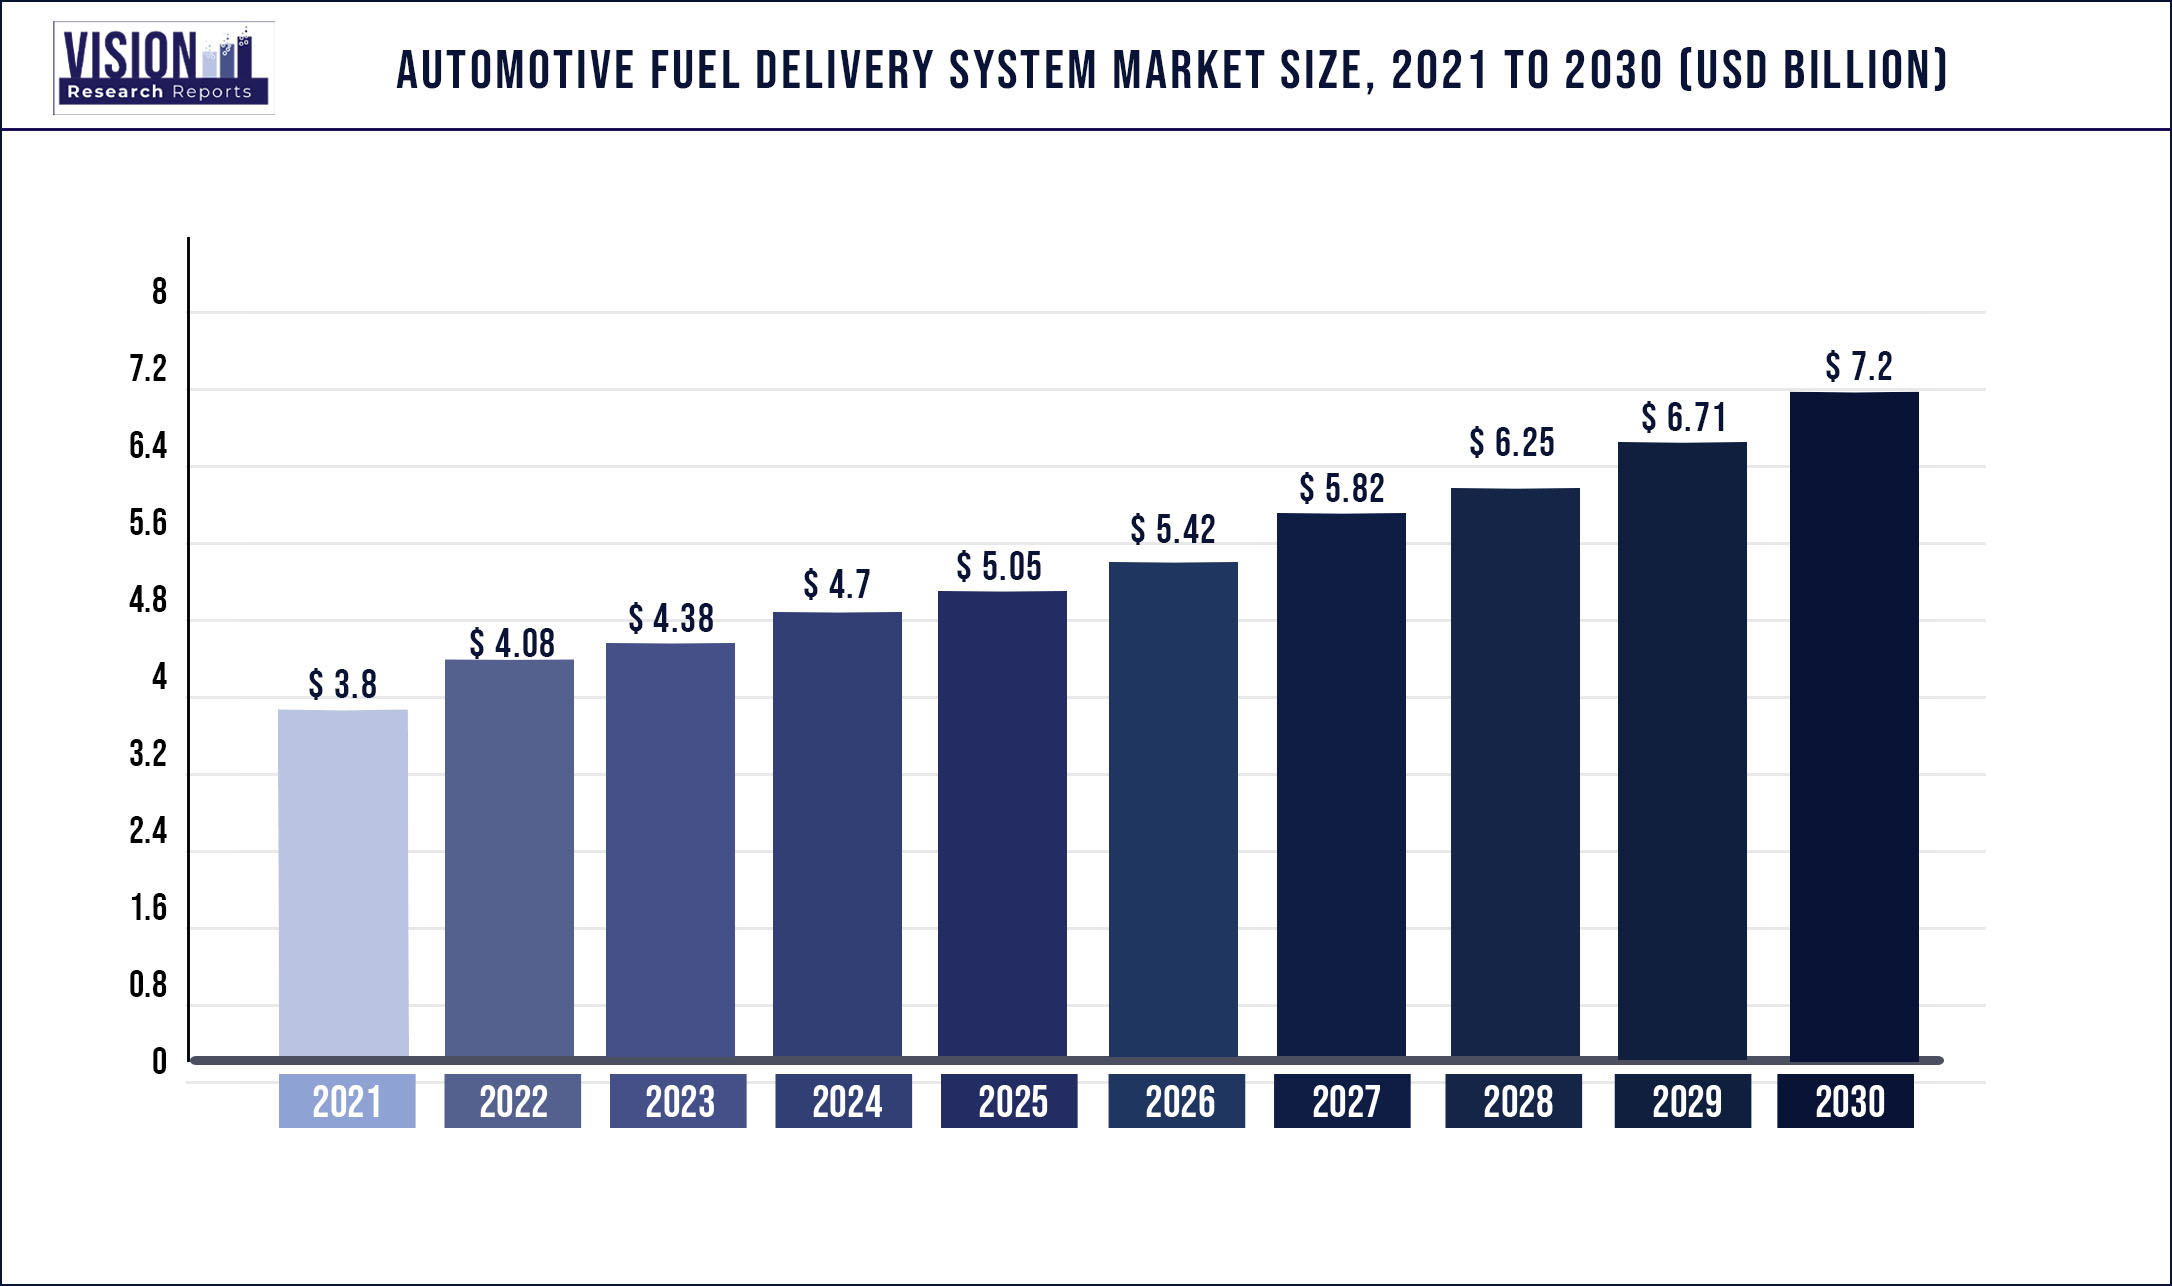 Automotive Fuel Delivery System Market Size 2021 to 2030